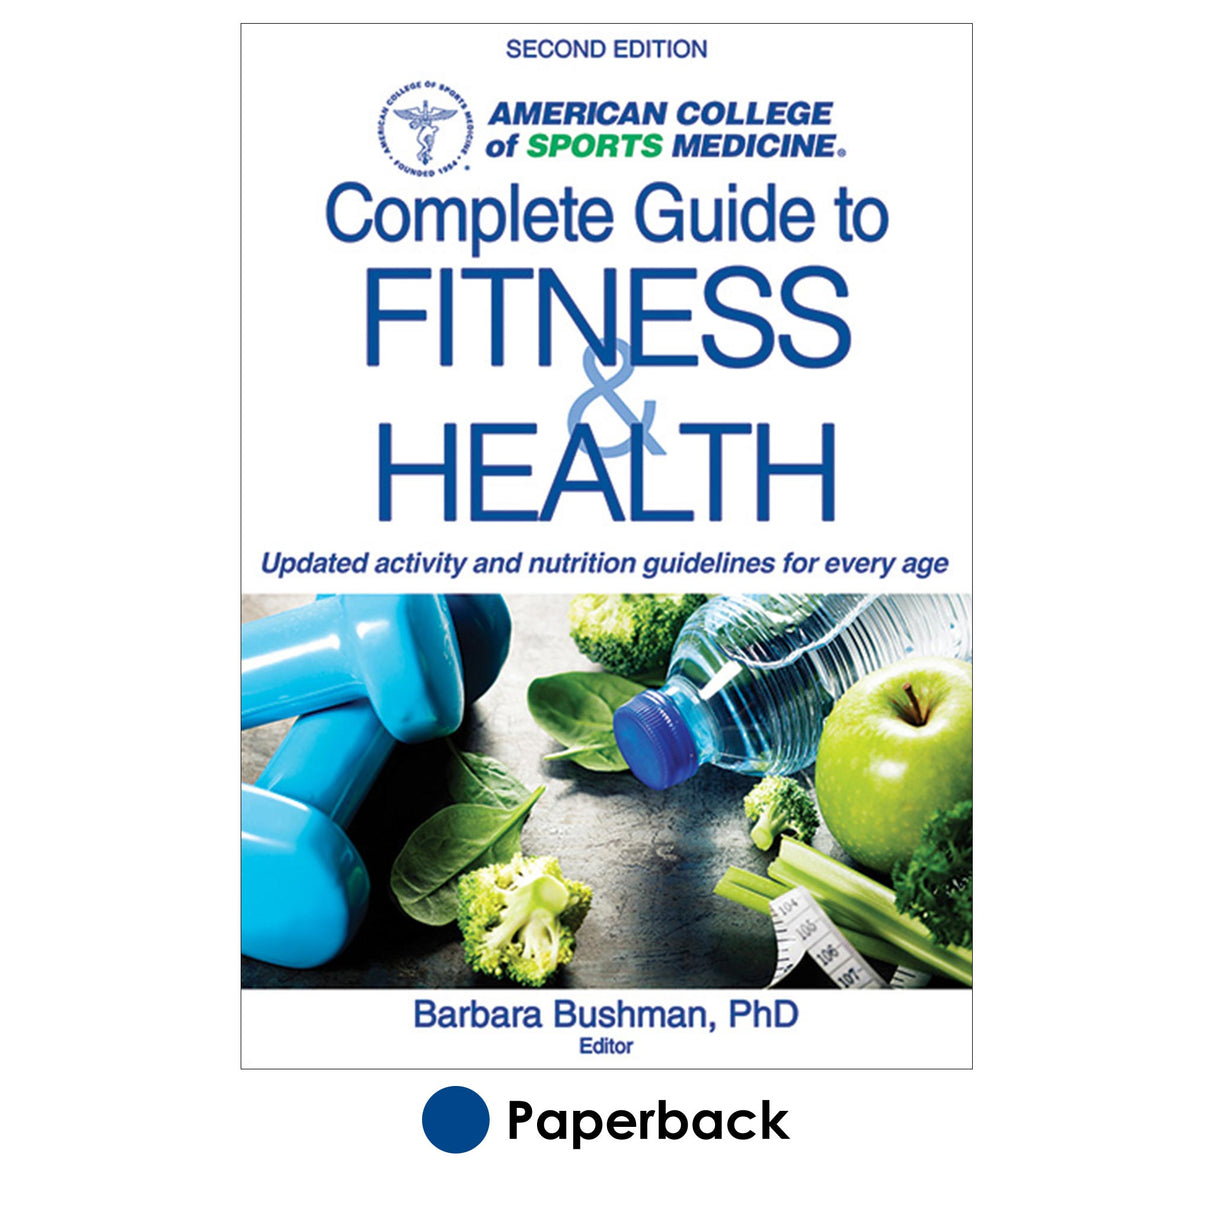 ACSM's Complete Guide to Fitness & Health 2nd Edition